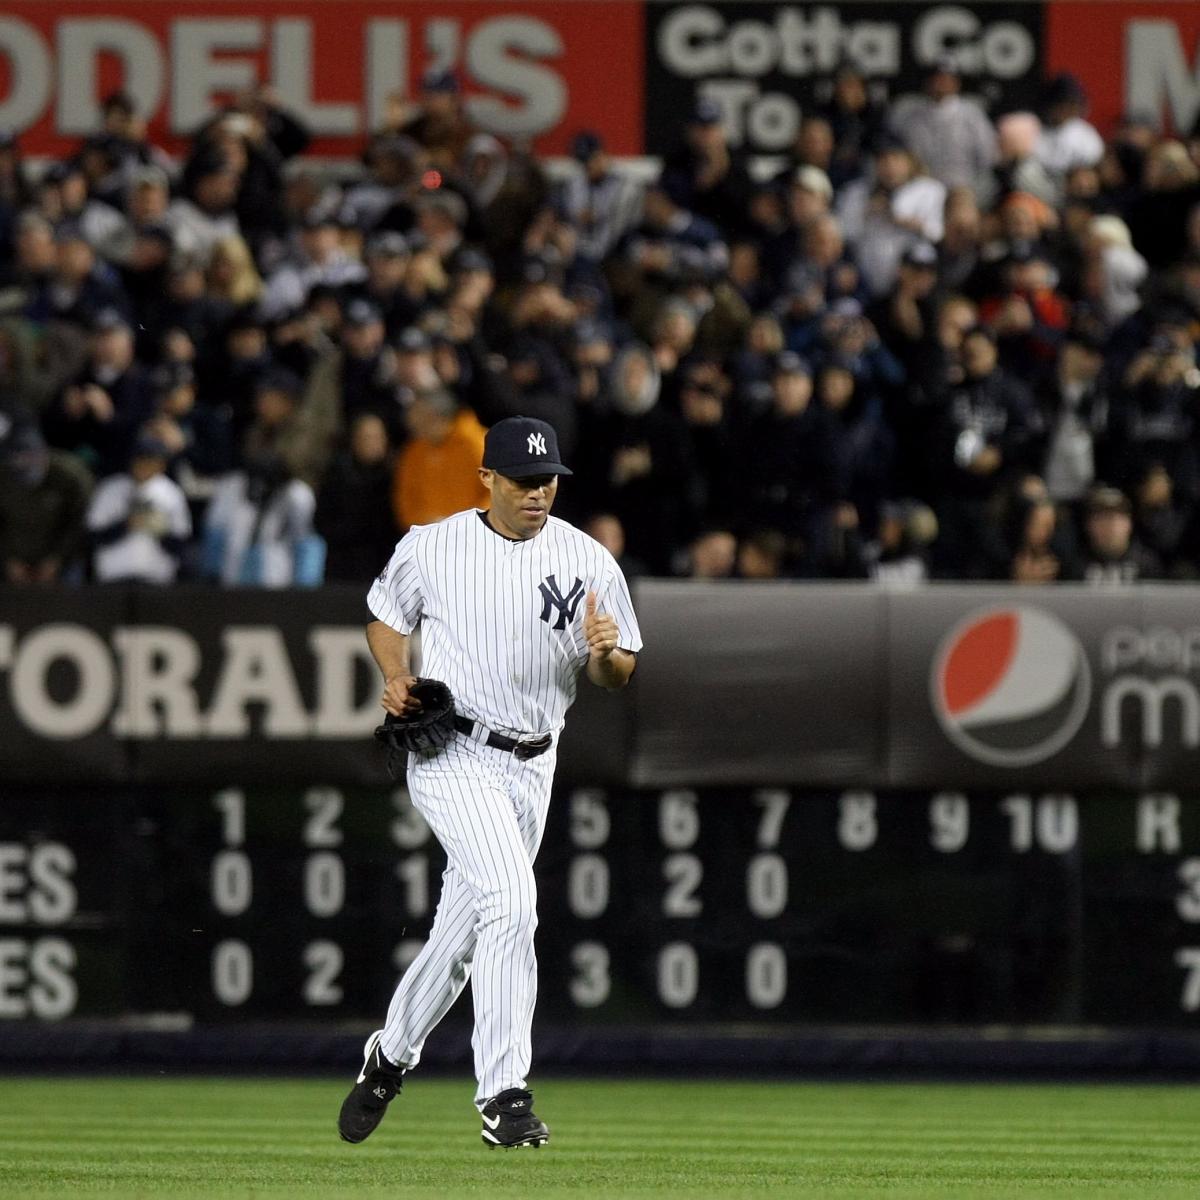 Scott Brosius leads Yankees to comeback victory in Game 3 of the